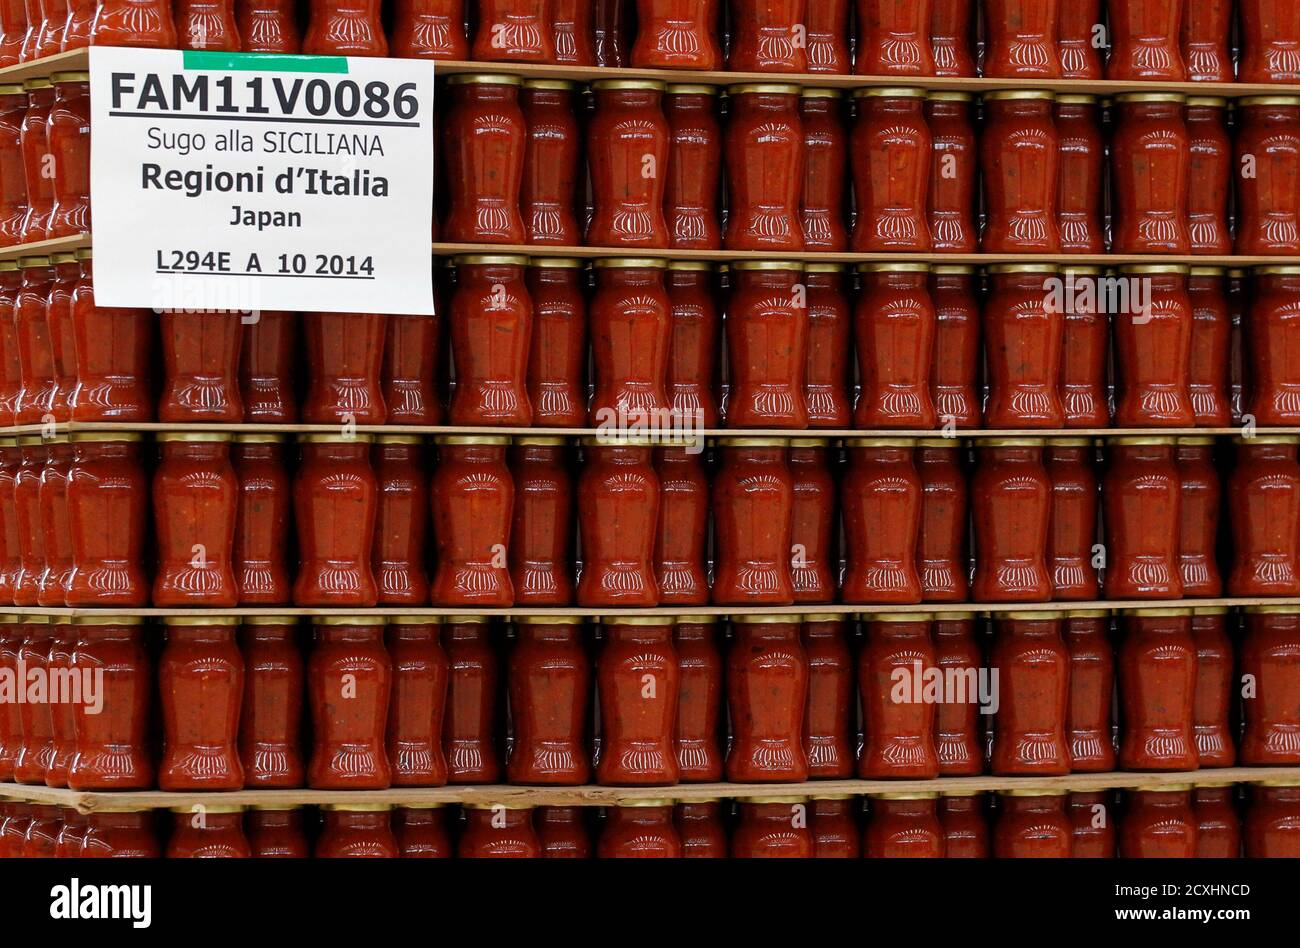 Ready-made pasta sauces are seen packaged in one of Paolo Ricciulli's  factories in Parma November 11, 2011. Ricciulli, awarded a "Knight of  Labour" honour for his business achievements, employs around 220 people